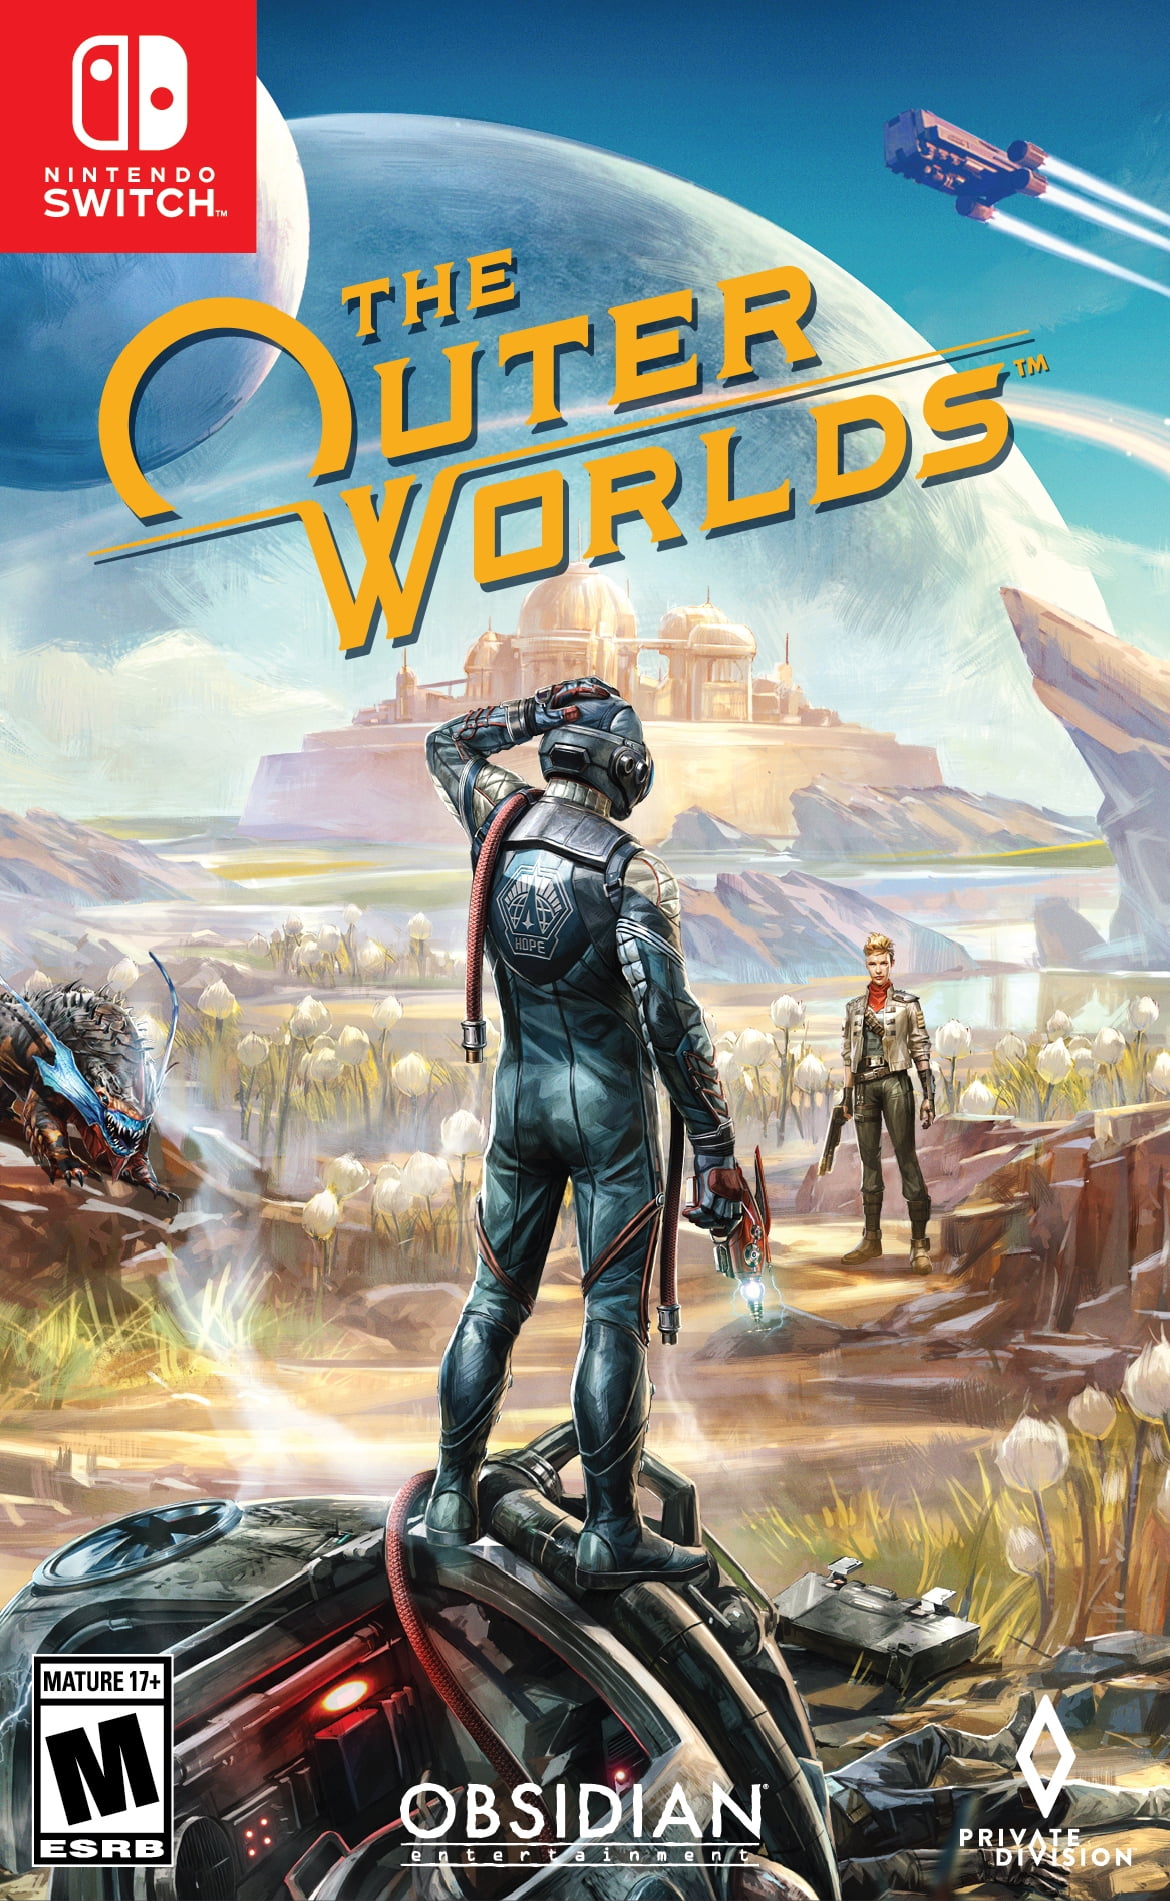 The Outer Worlds - Playstation 4 – Retro Raven Games